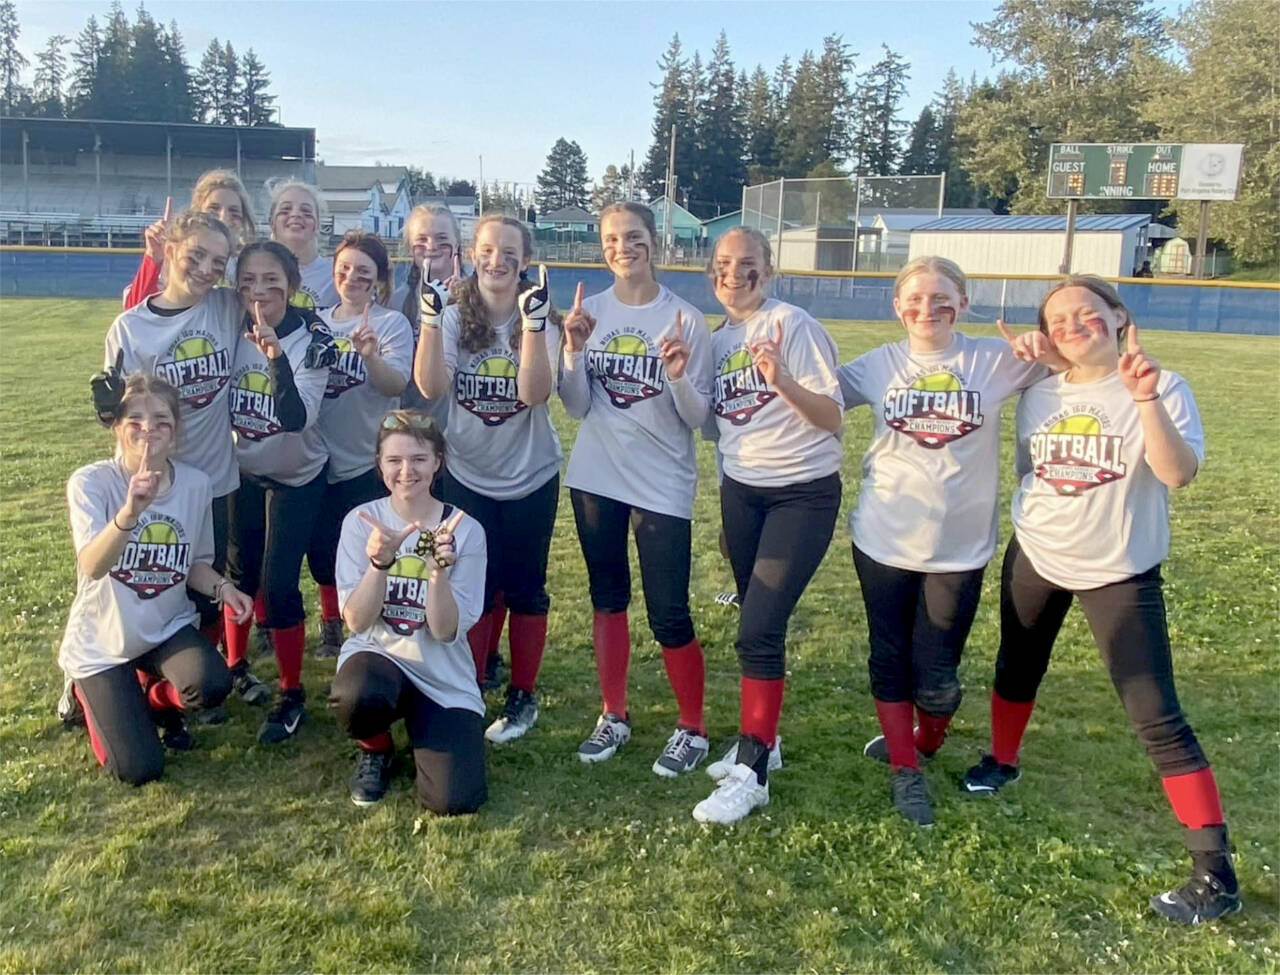 The KONP 16U girls won the Port Angeles city championship in a series of tournaments this weekend at Lincoln Park and Volunteer Park. From left, back row, are Jadyn McCabe, Bridget Weed and Evelyn Seelye. From left, middle row, are London Lyster, KK Eastman, Lilly’Mae Treider, Chloe Clark, Sophia Ritchie, Keira Headrick, Erika Osterberg and Harlie Larrance. From left, kneeling, are Brooke Pierce and Sam Marshall.